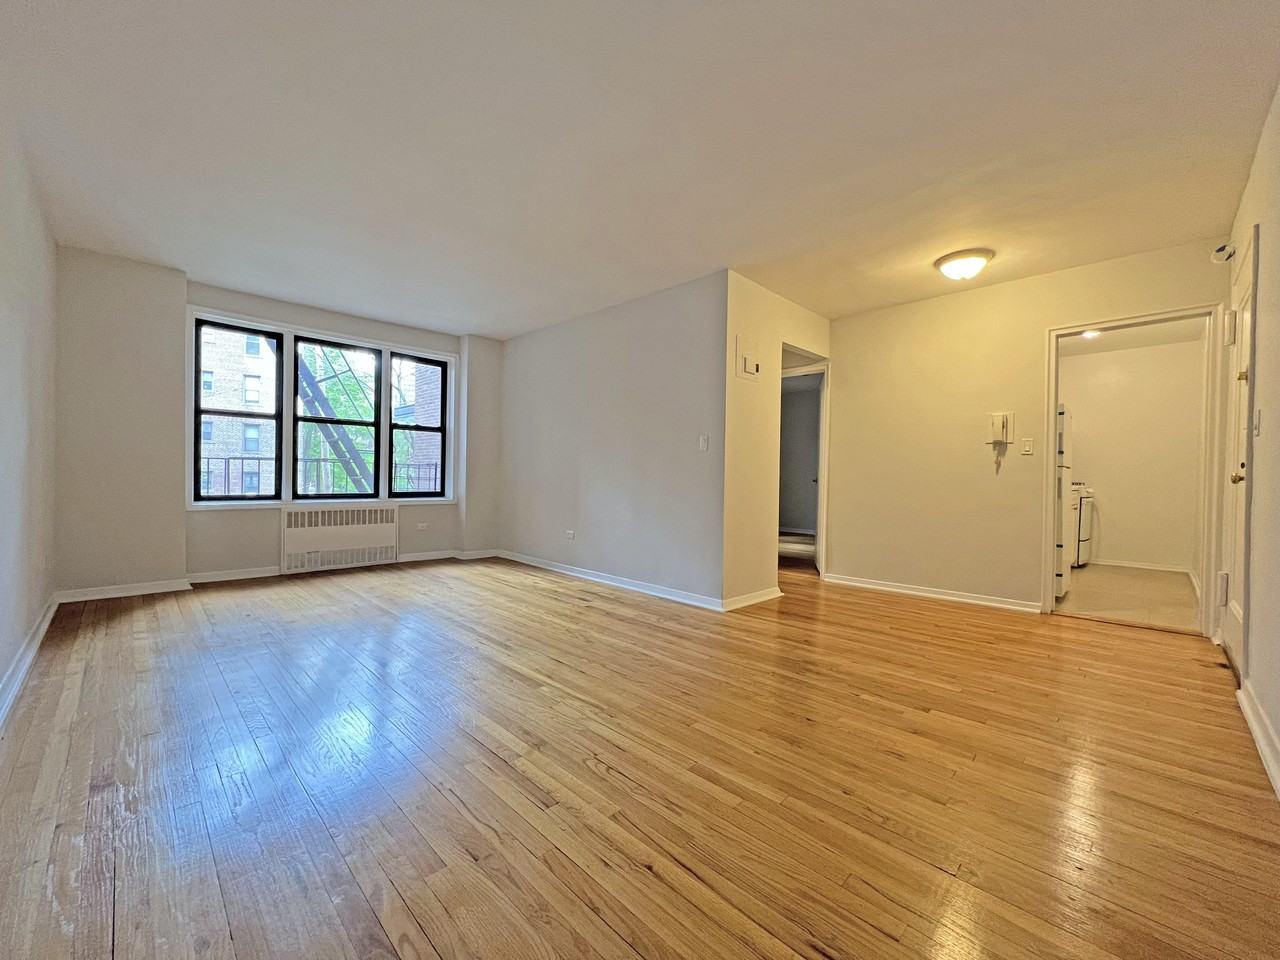 Apartments for Rent In Riverdale, New York, NY - 25 Rentals Available |  Zumper